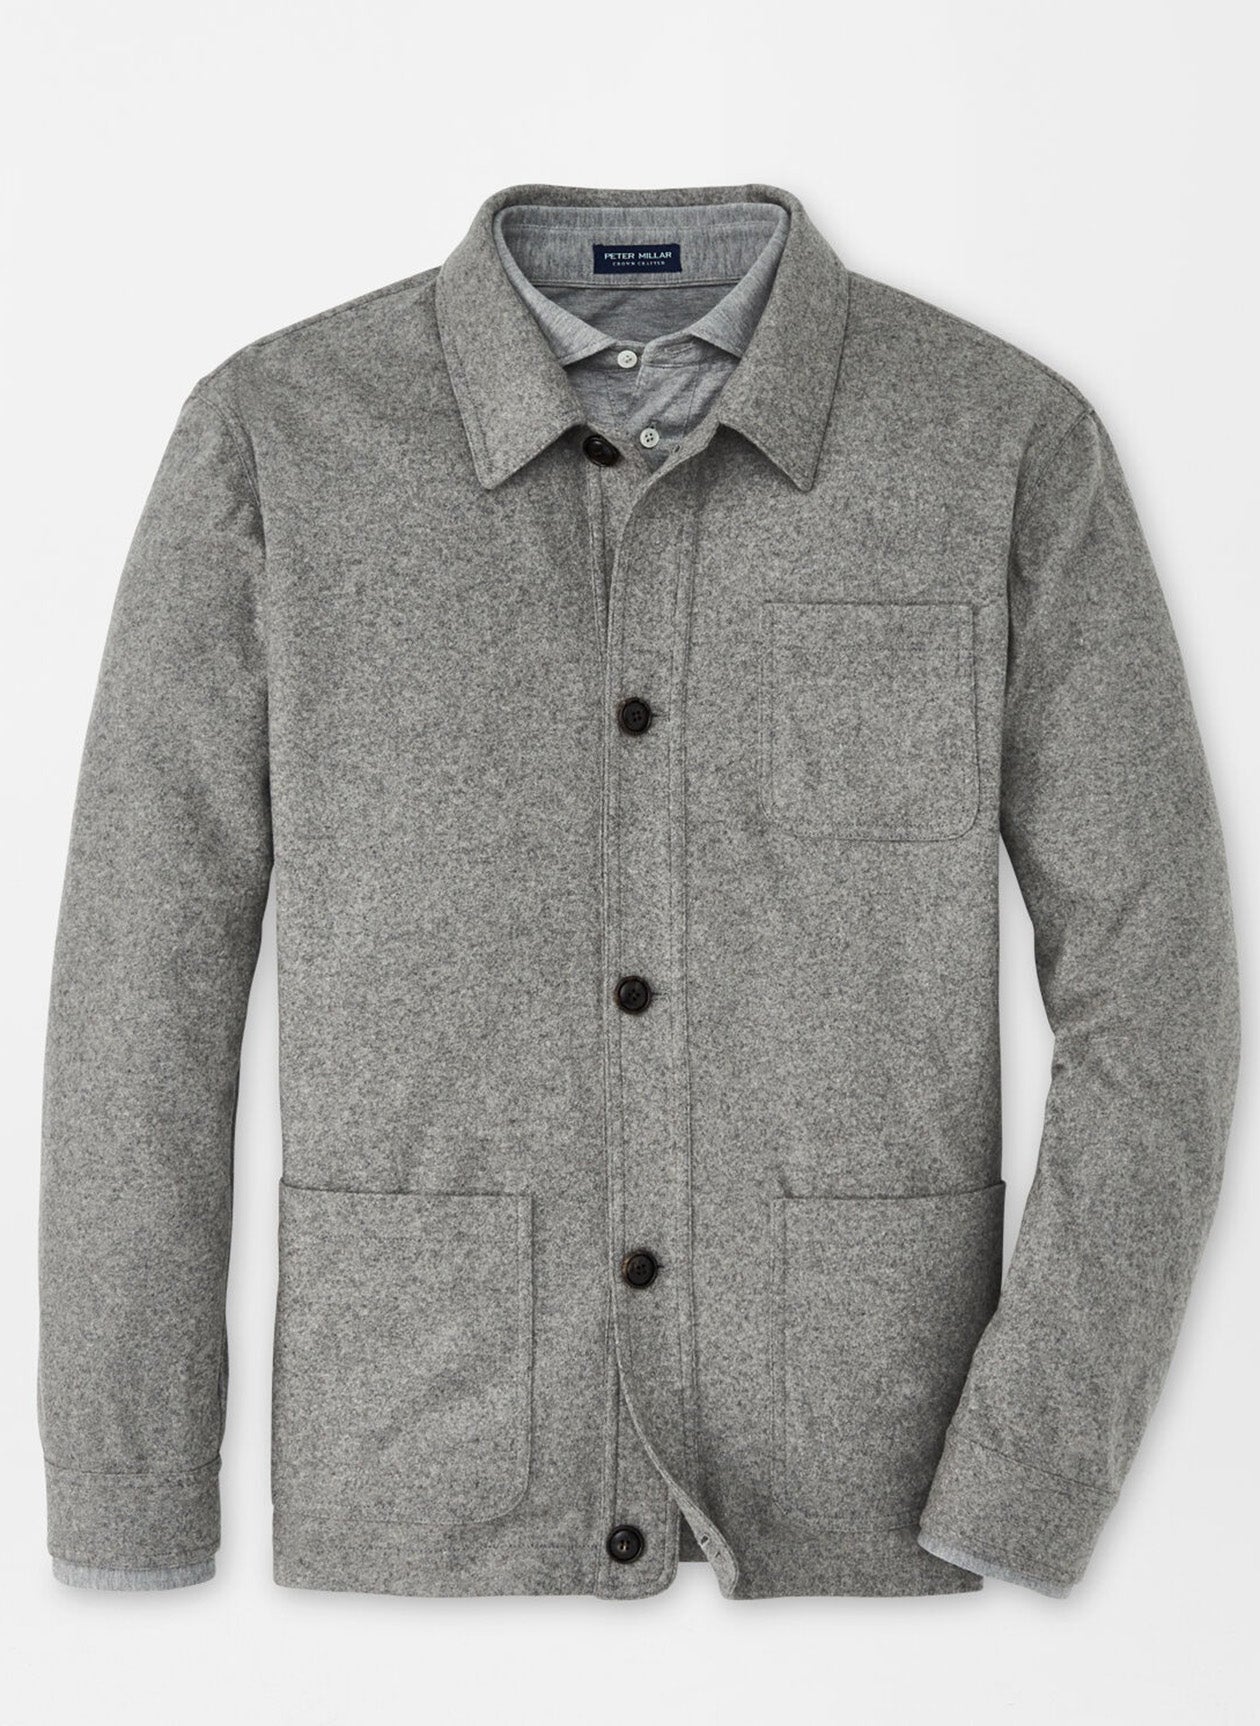 ARTISAN CRAFTED CASHMERE CHORE COAT - GALE GREY